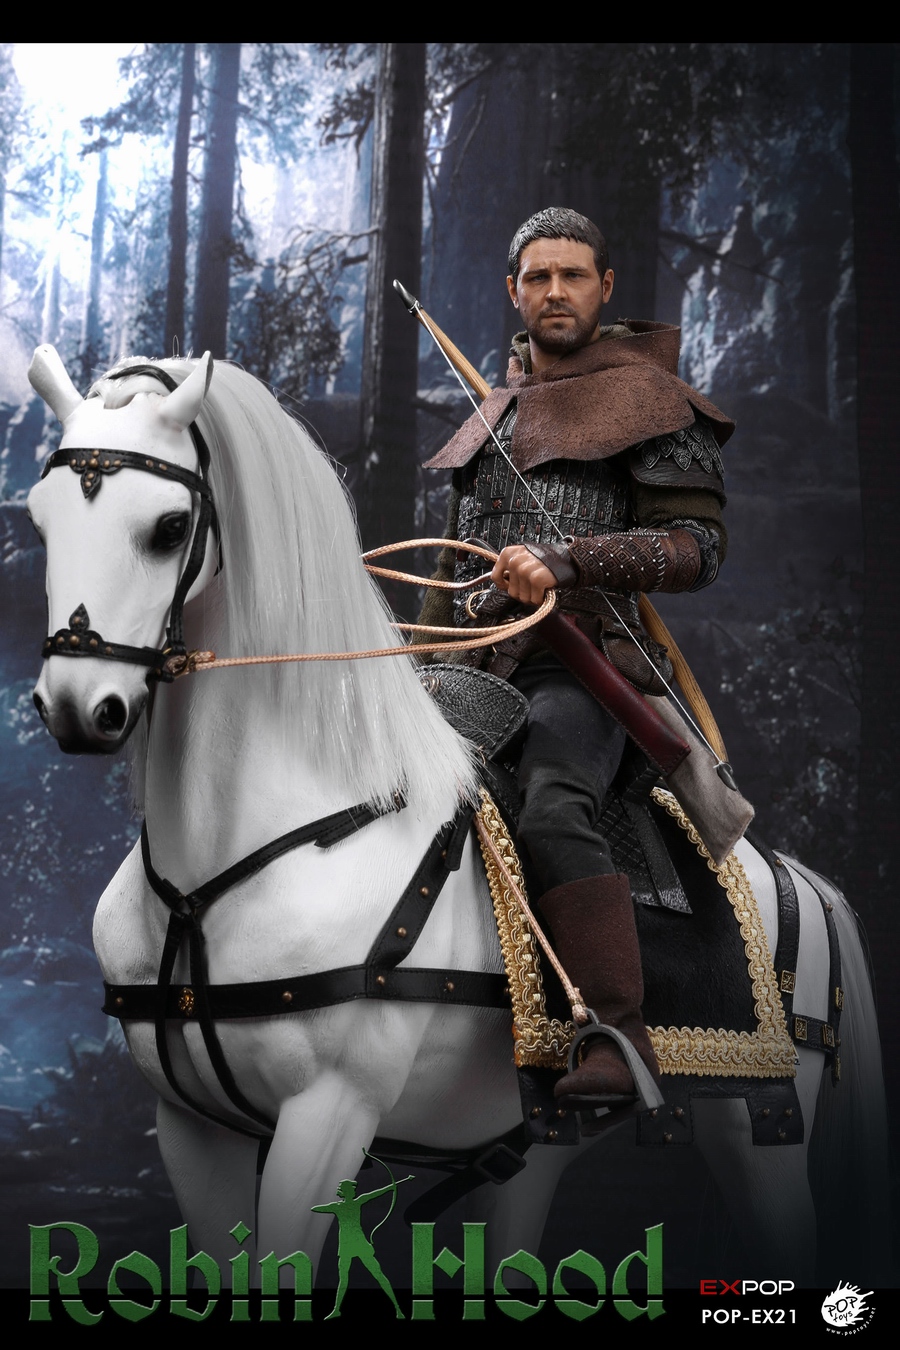 WarHorse - NEW PRODUCT: POPTOYS: 1/6 EX21 Robin Hood Chivalrous Robin Hood - Double Head Carving & War Horse 22410110